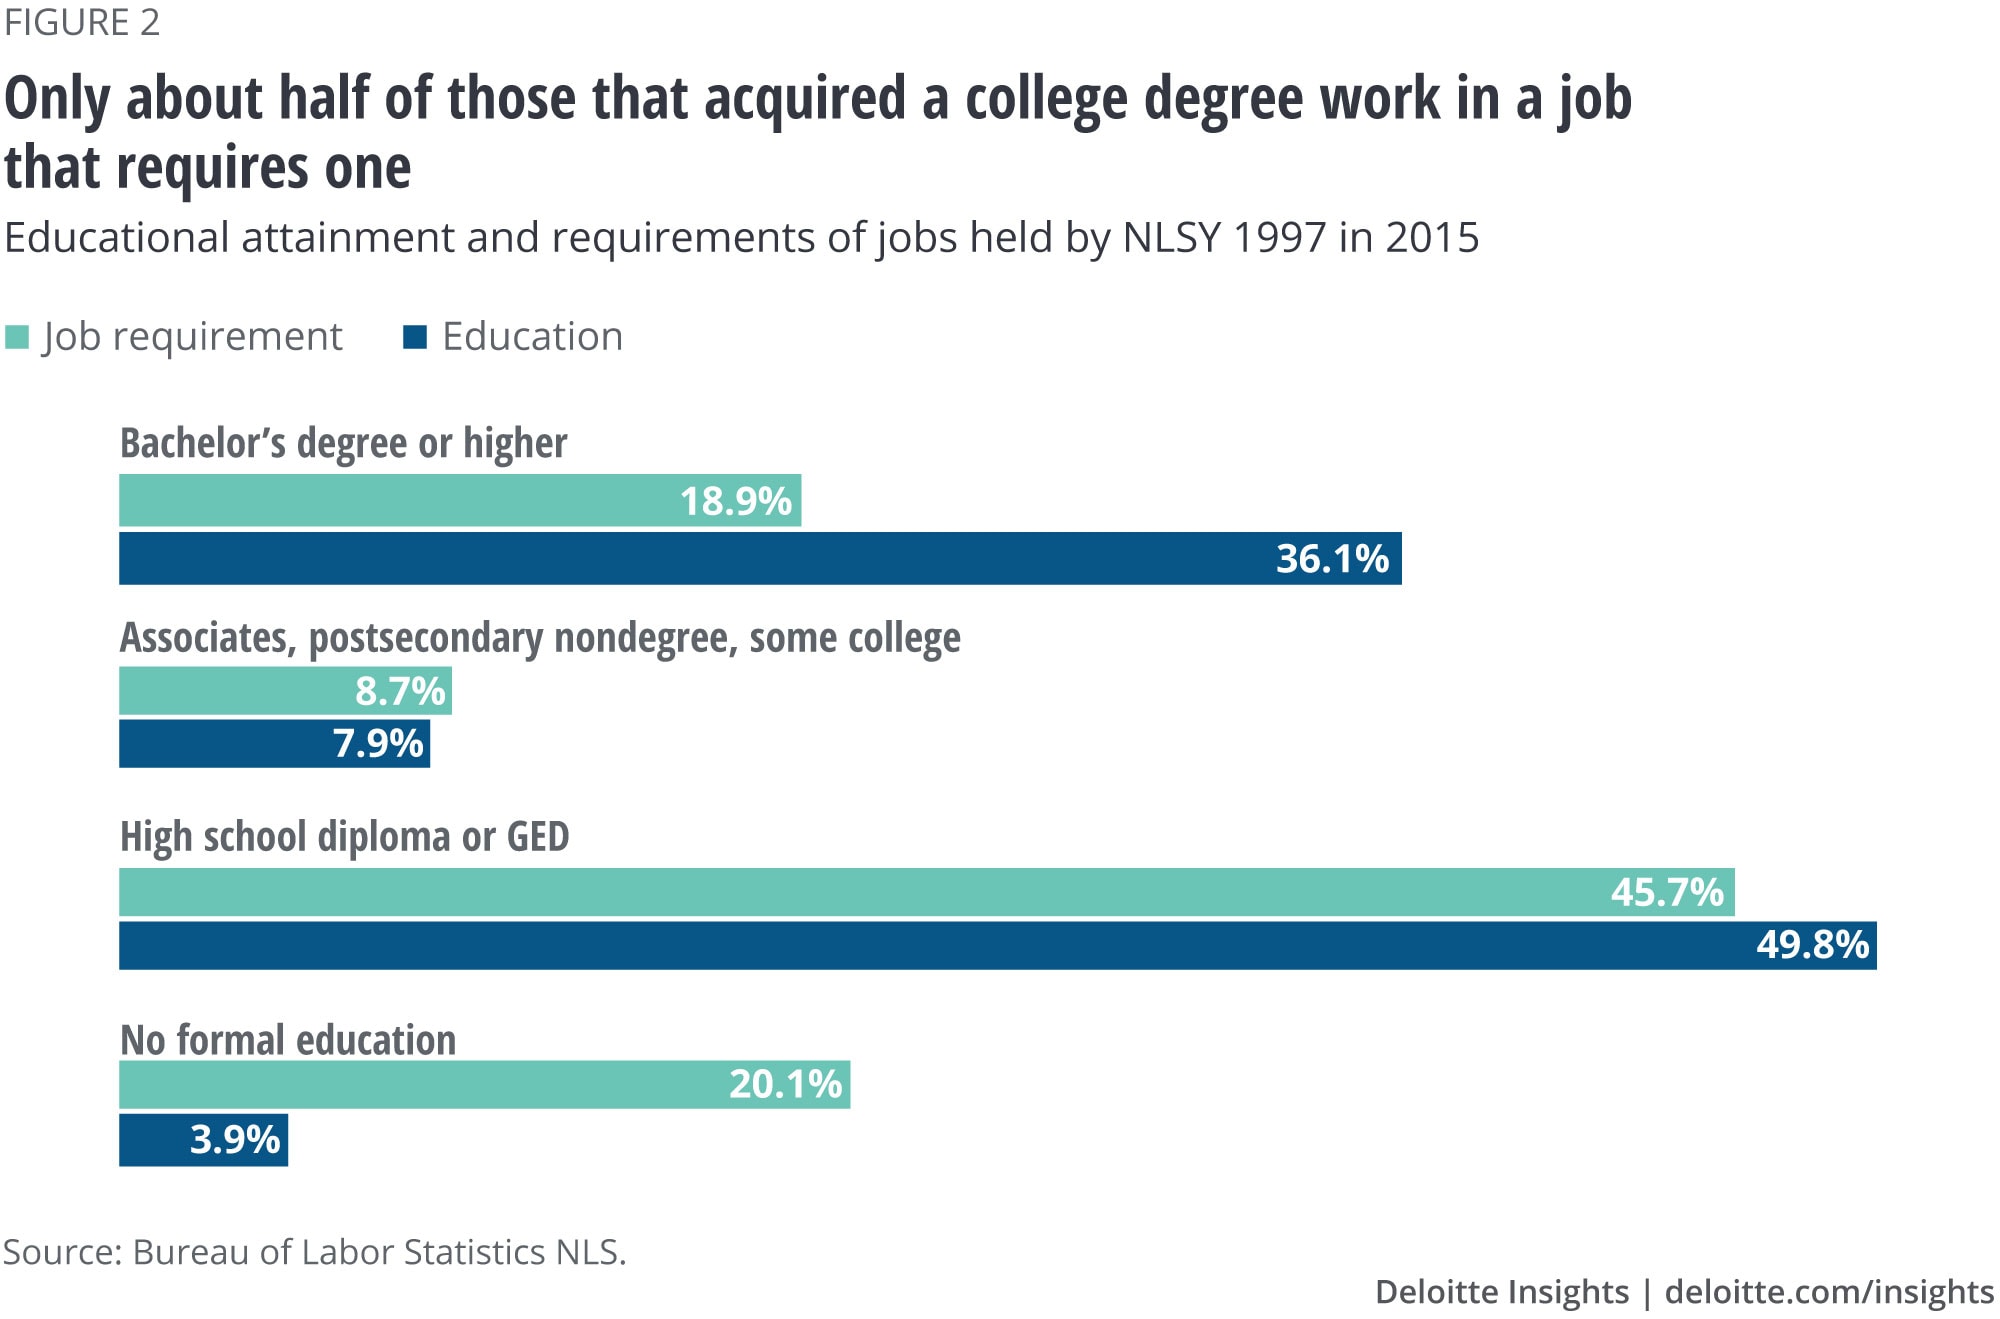 Only about half of those that acquired a college degree work in a job that requires one